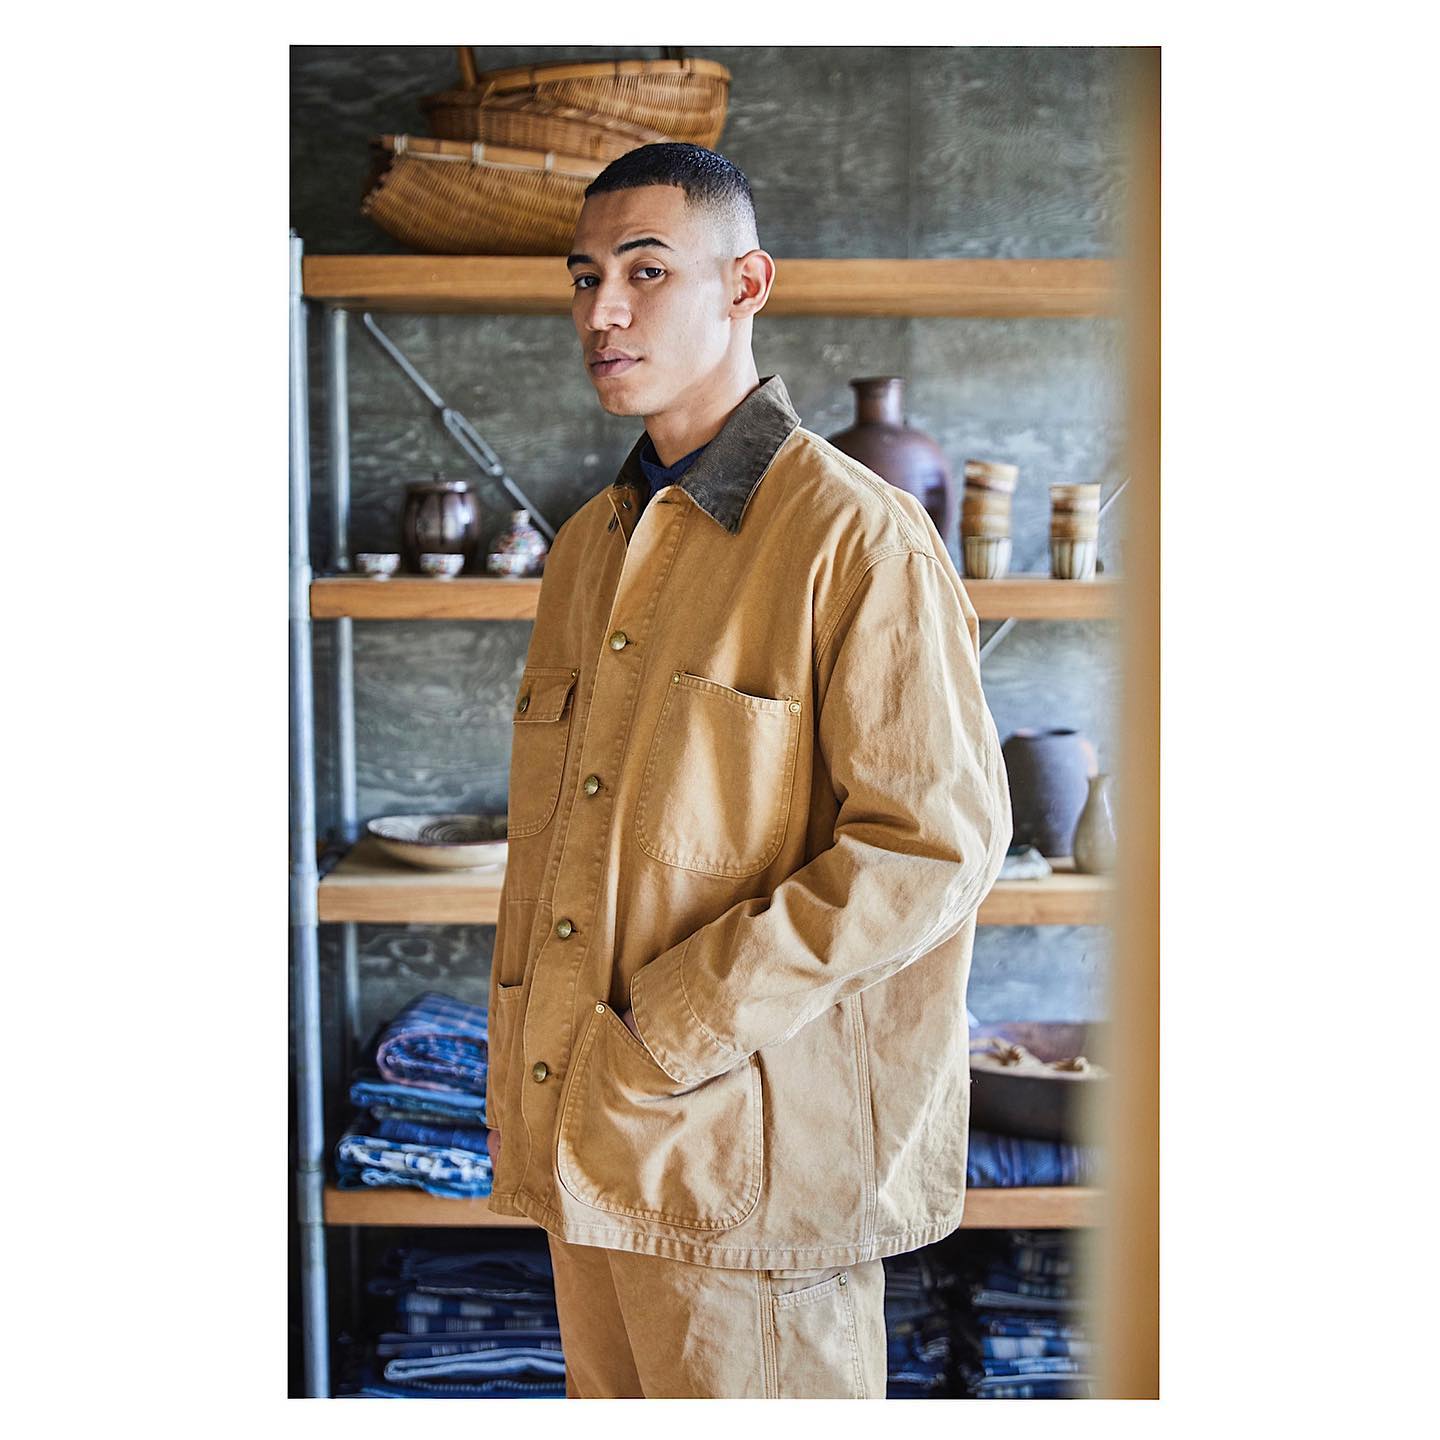 orSlow LOOSE FIT OXFORD COVERALL (Brown) – unexpected store